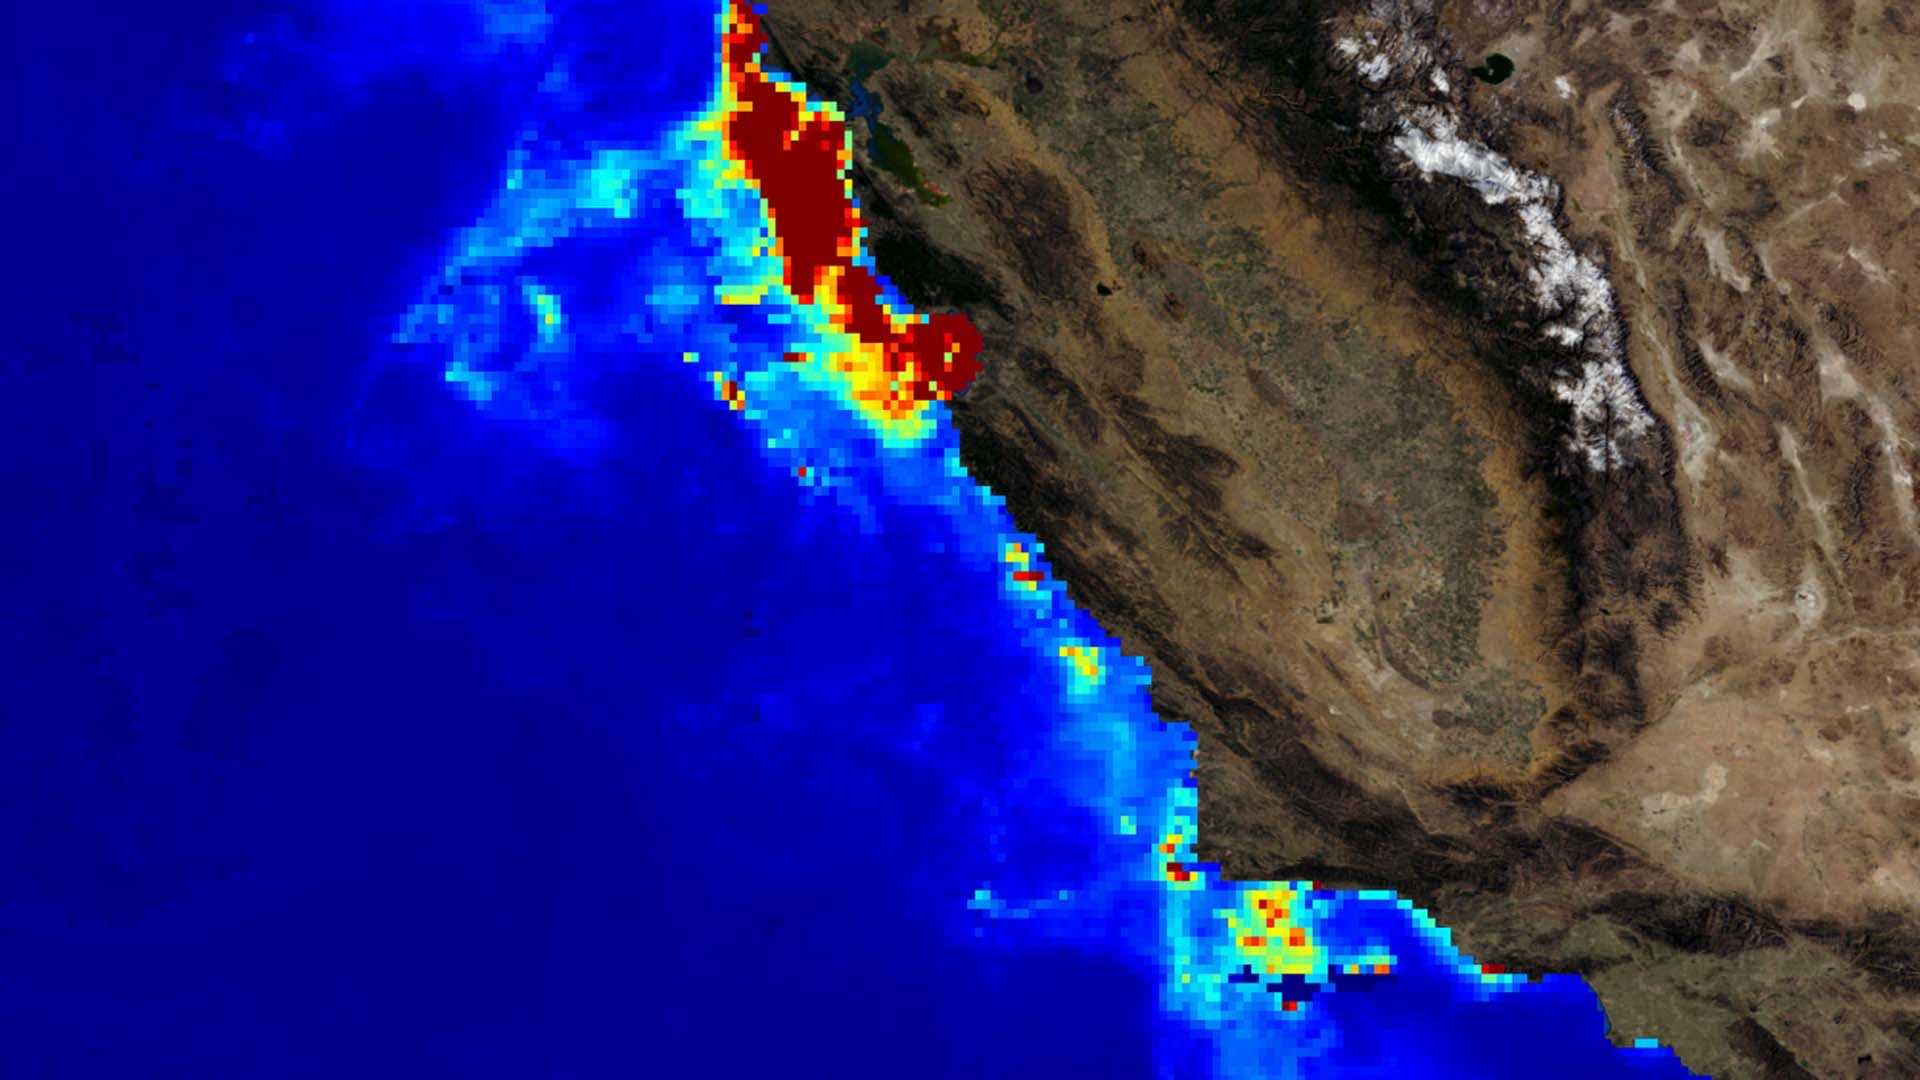 Predicting Grunion Migration Patterns and Spawning Areas in Response to Changes in California's Oceans